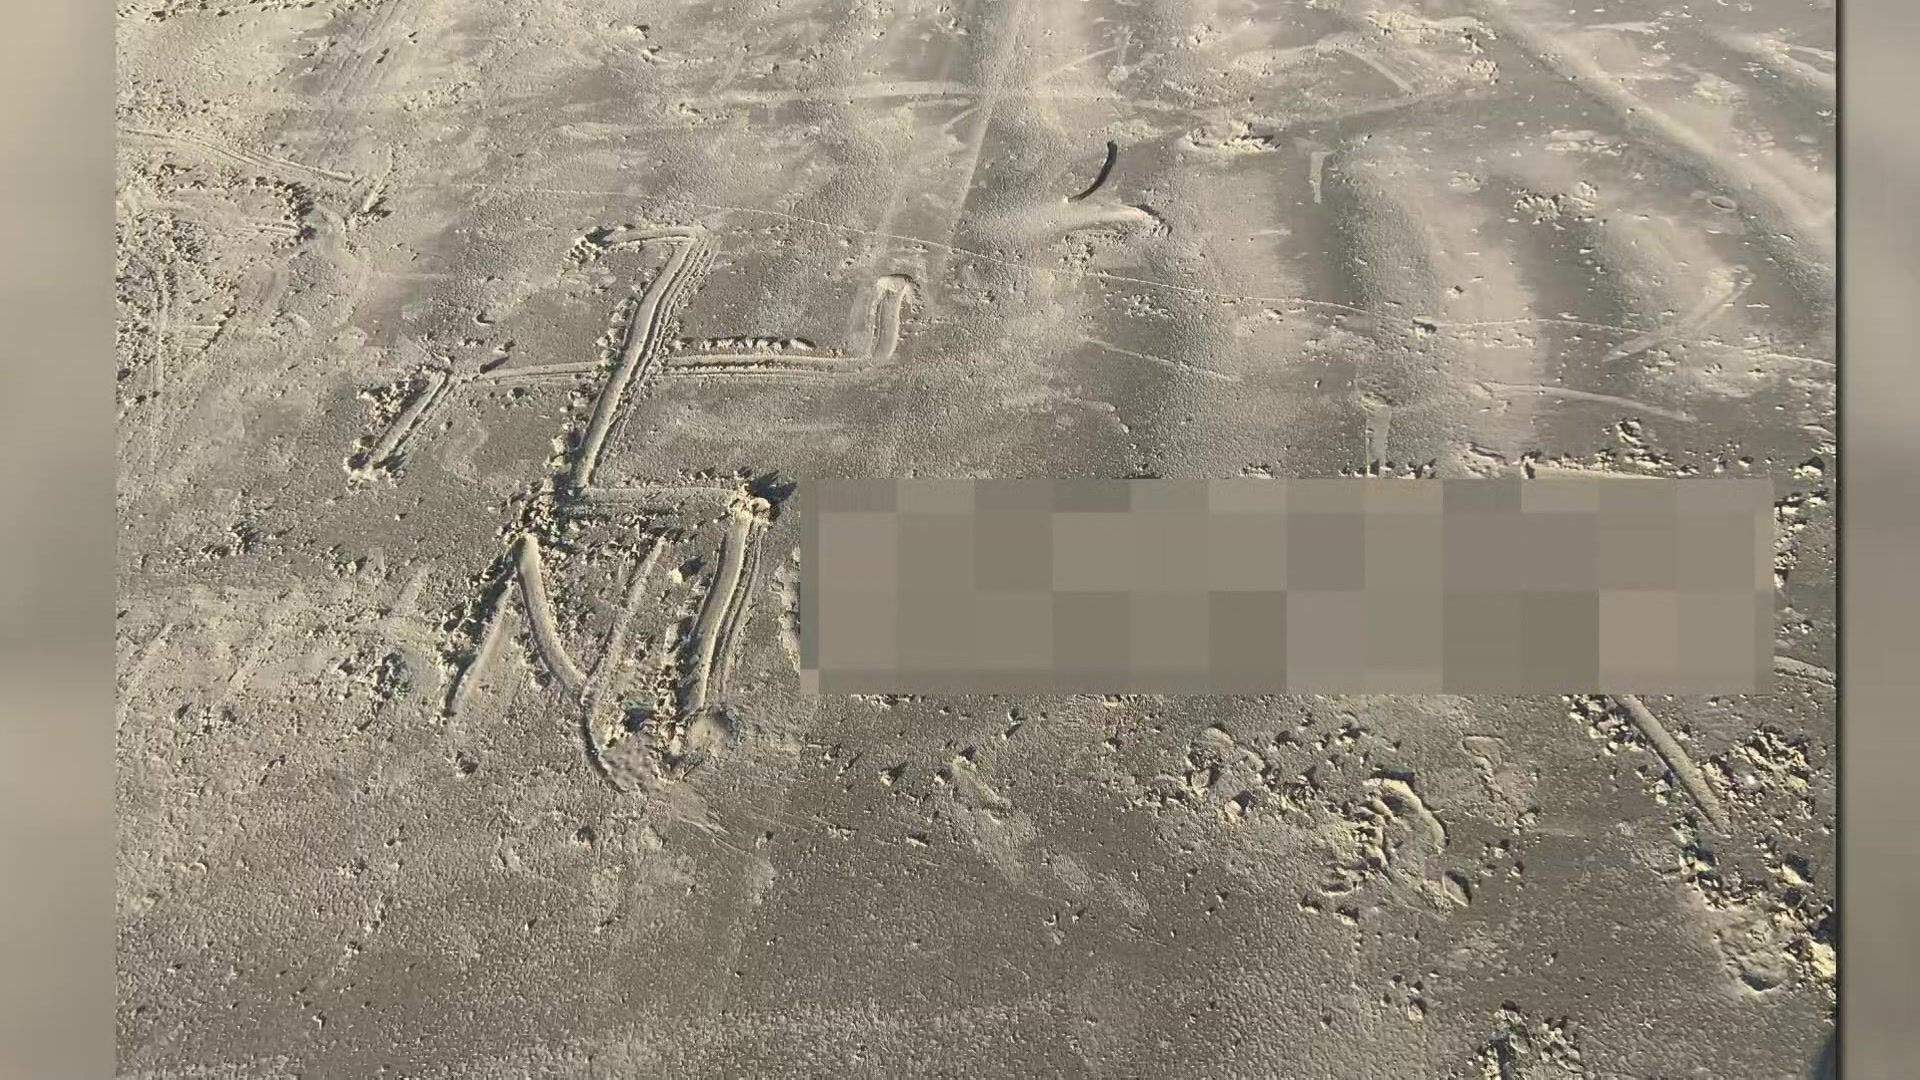 Woman finds racist message written in sand behind beach house in Galveston